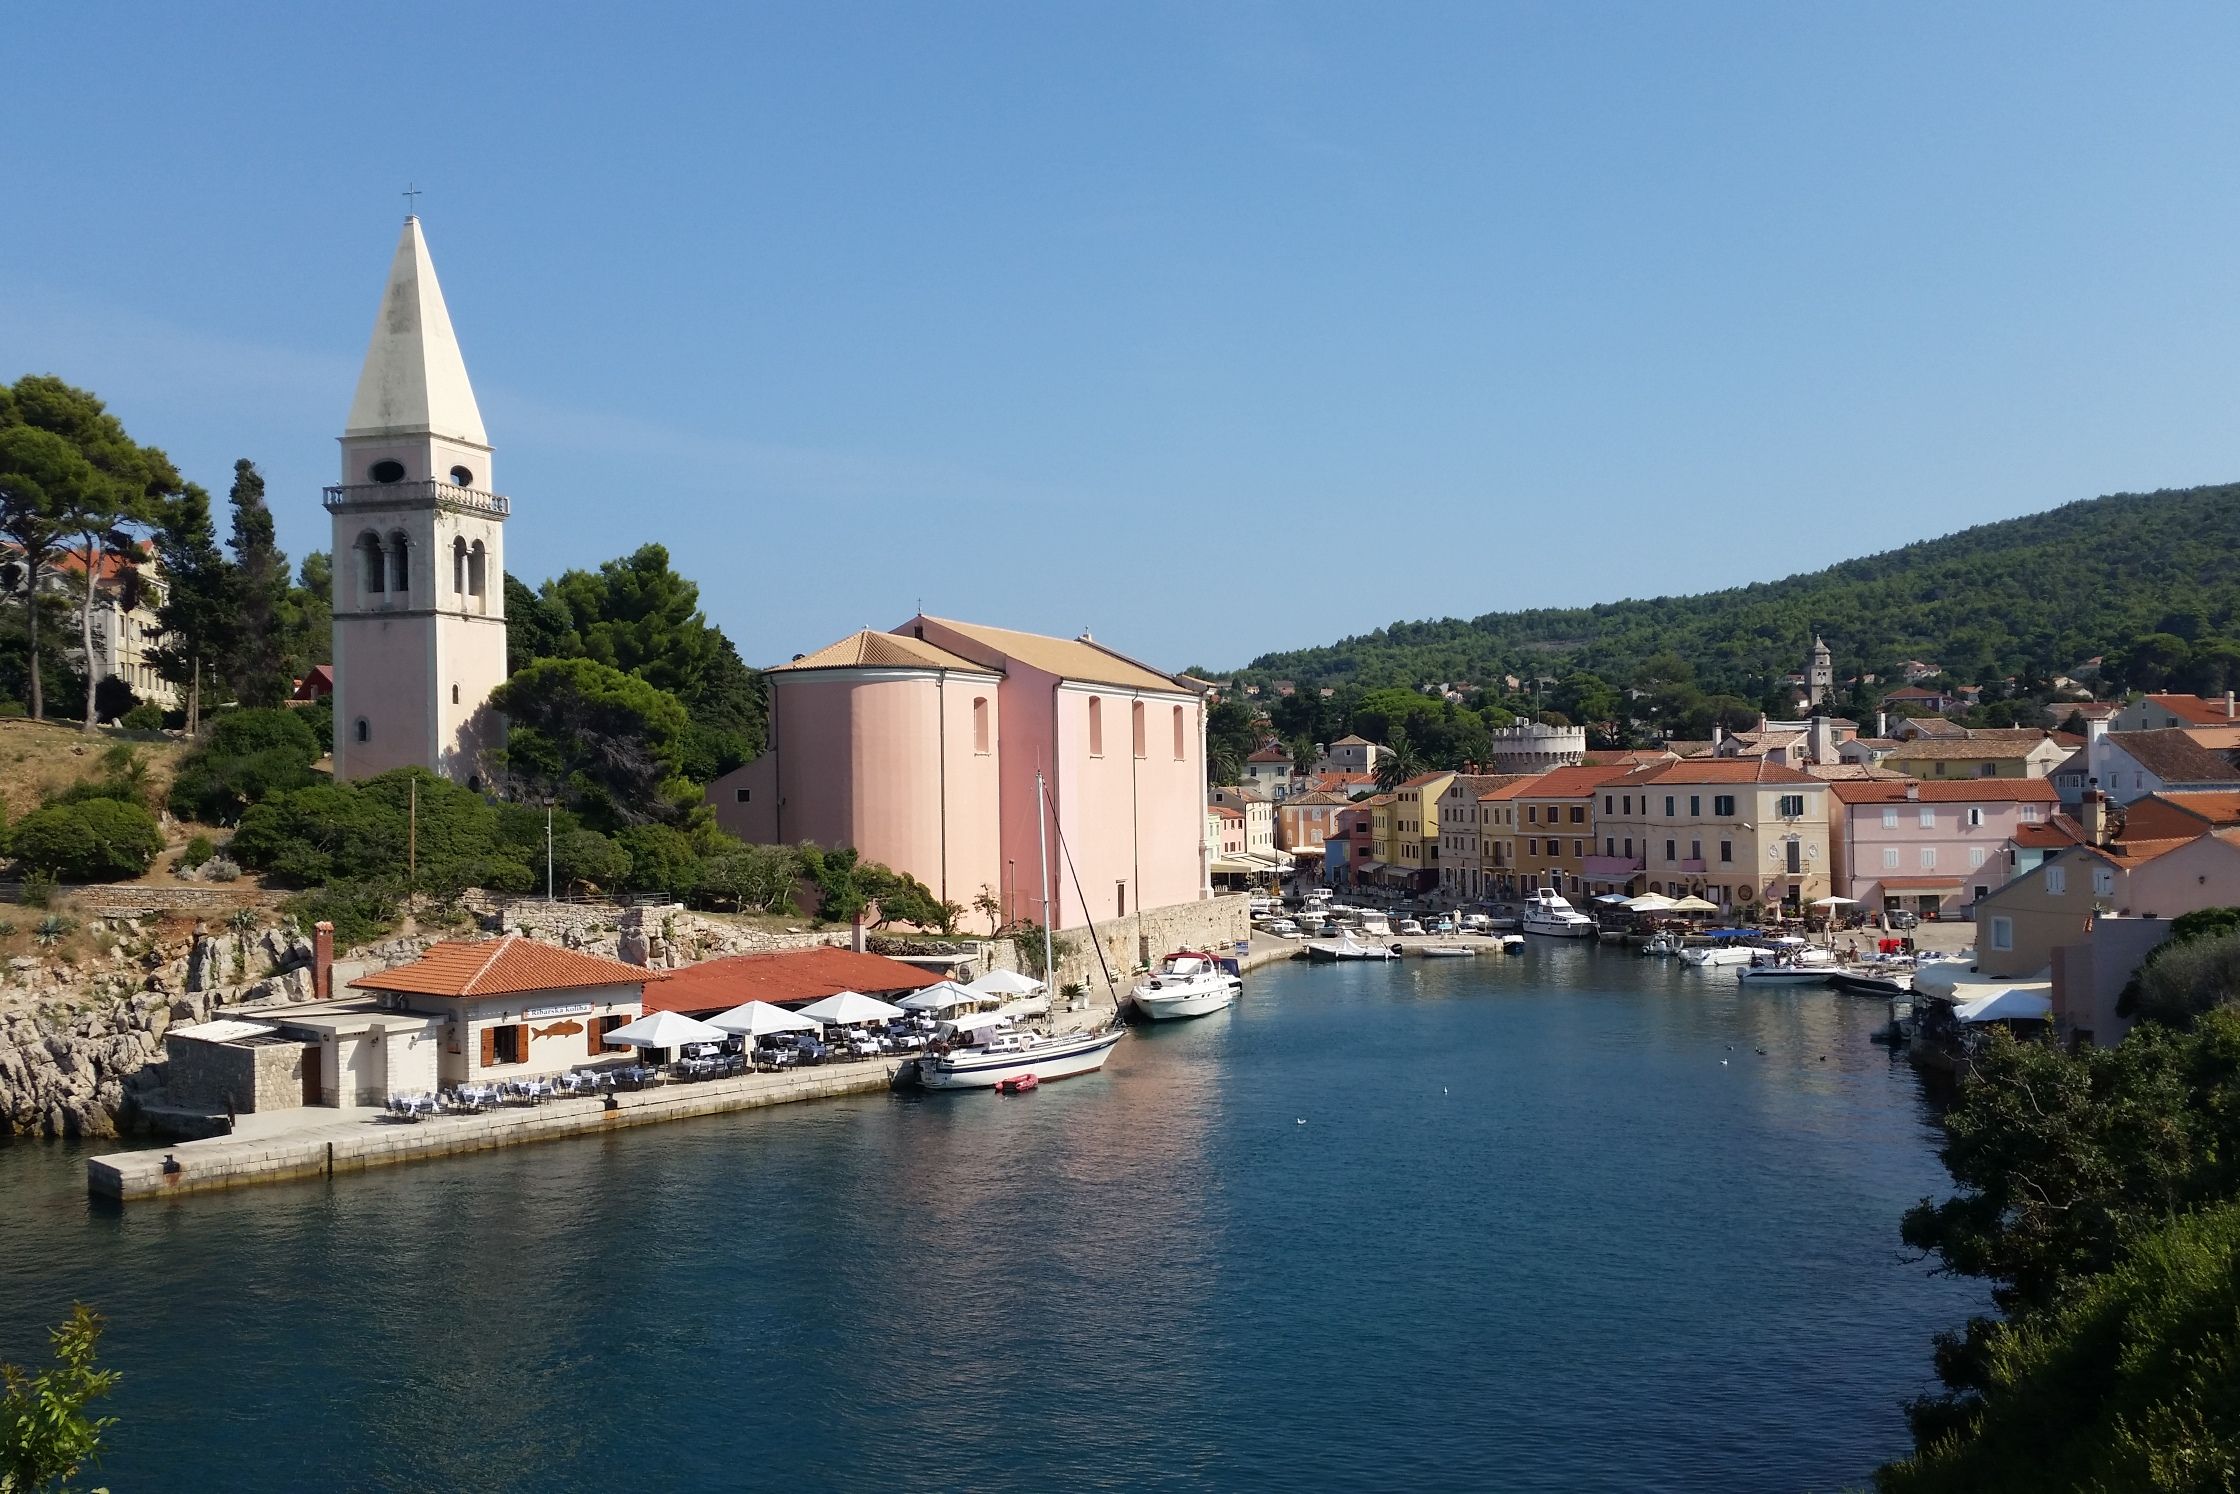 Veli Lošinj, the place where you can go to experience dolphin watching